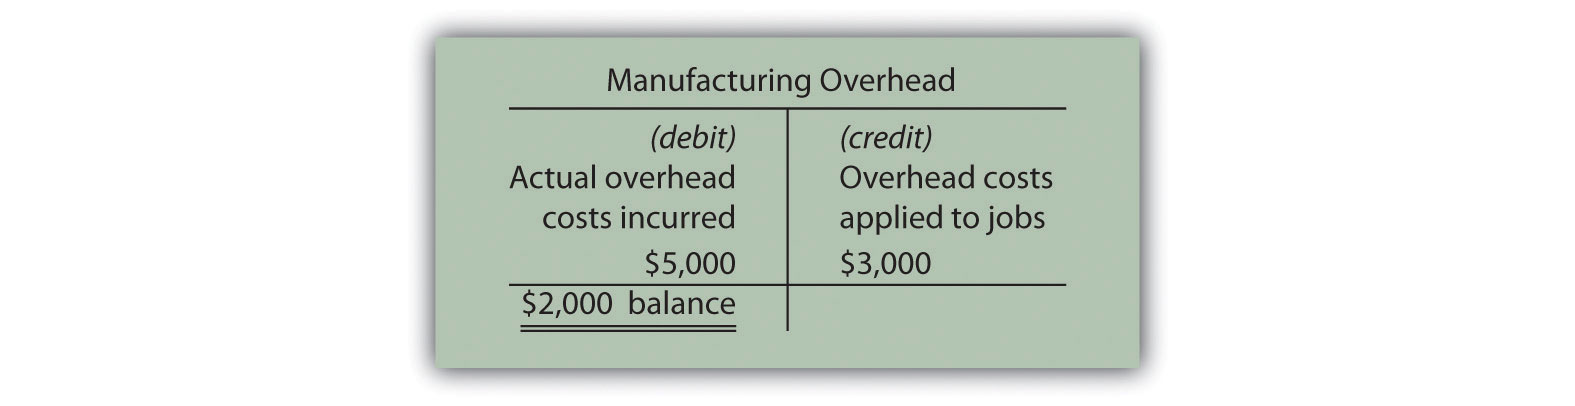 Debit for actual overhead 5000 and credit 3000 overhead applied results in a 2000 underapplied balance